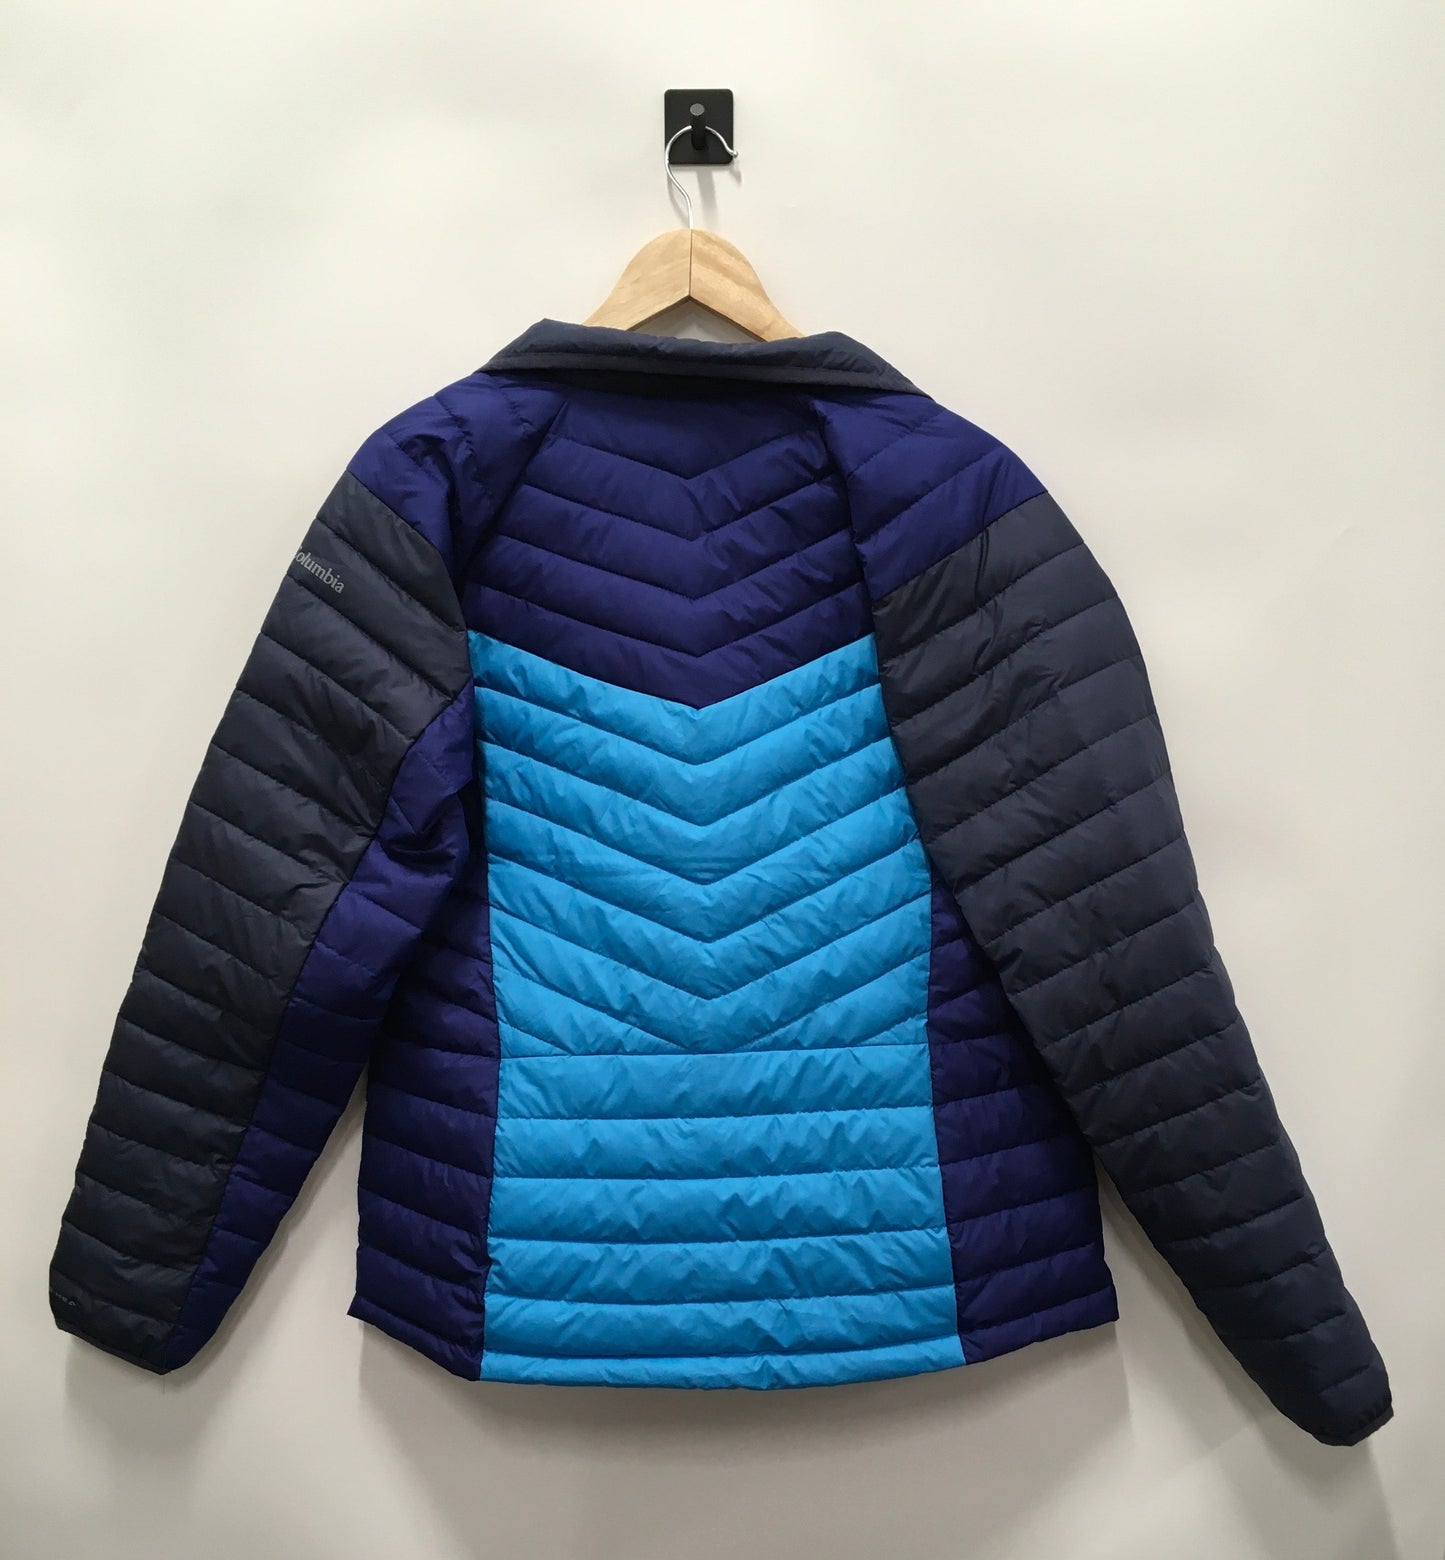 Navy Jacket Puffer & Quilted Columbia, Size Xl